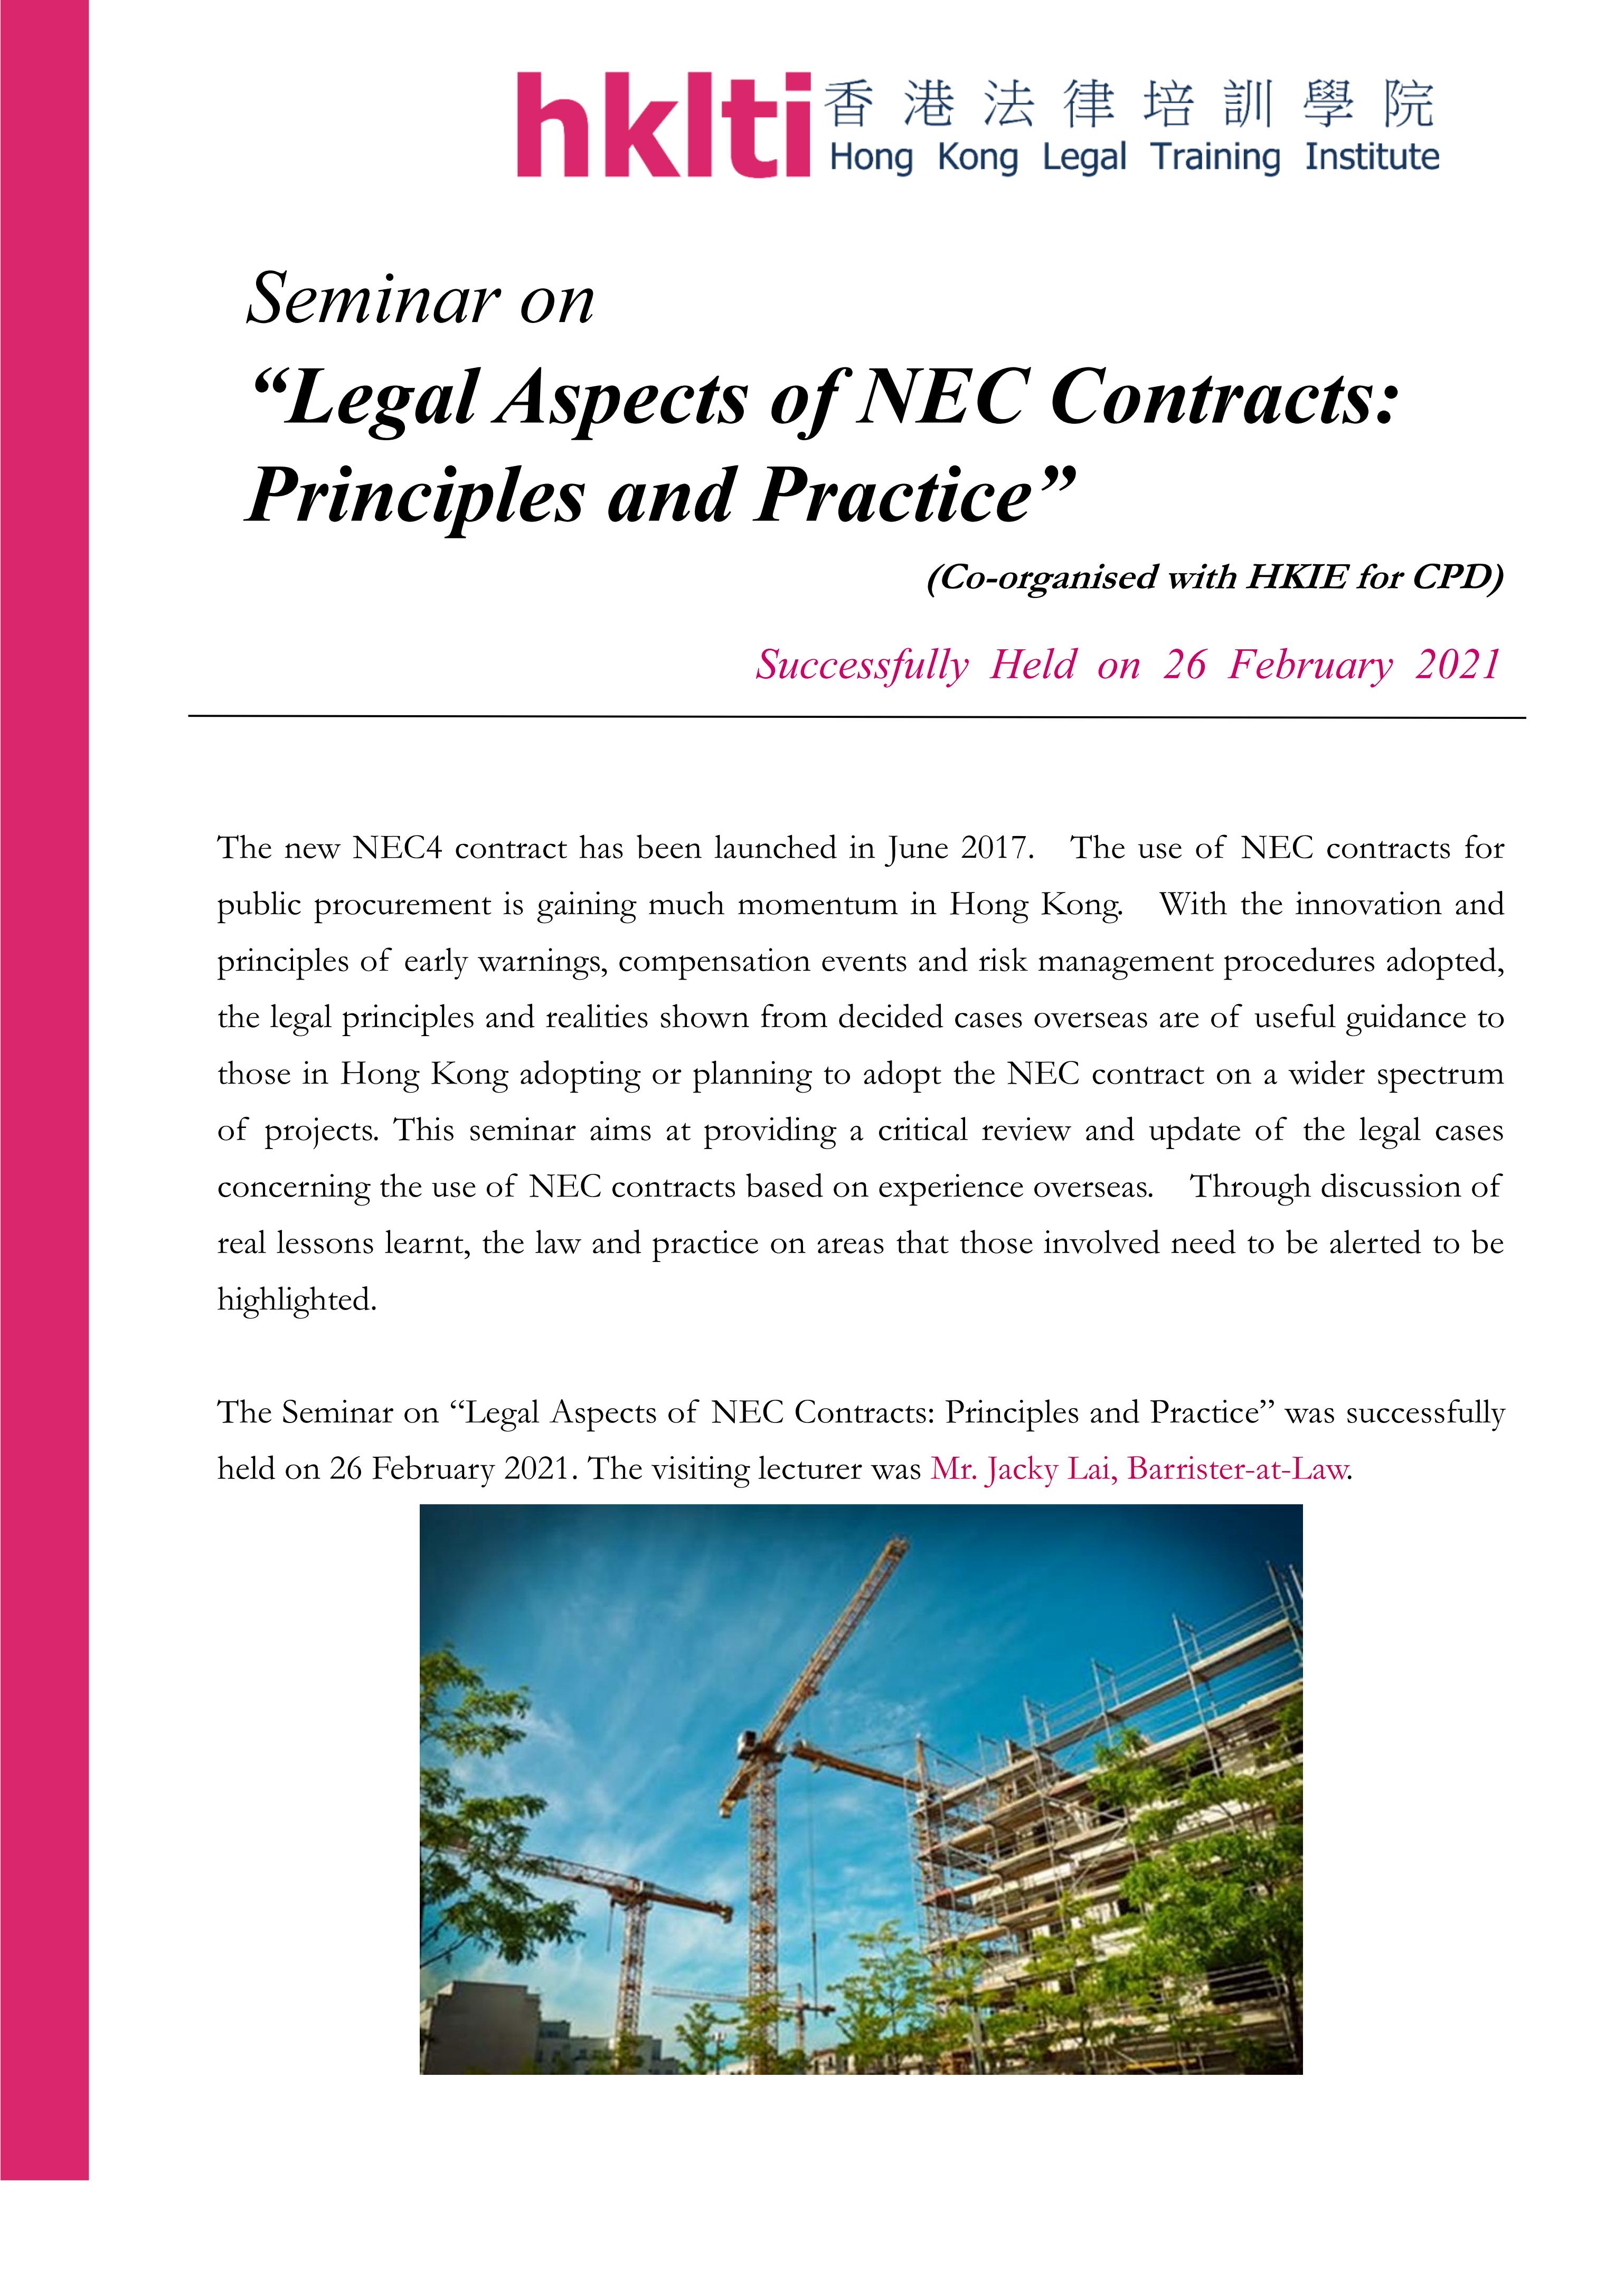 hklti hkie legal aspects of NEC Contracts Principle and Practice seminar report 20210226